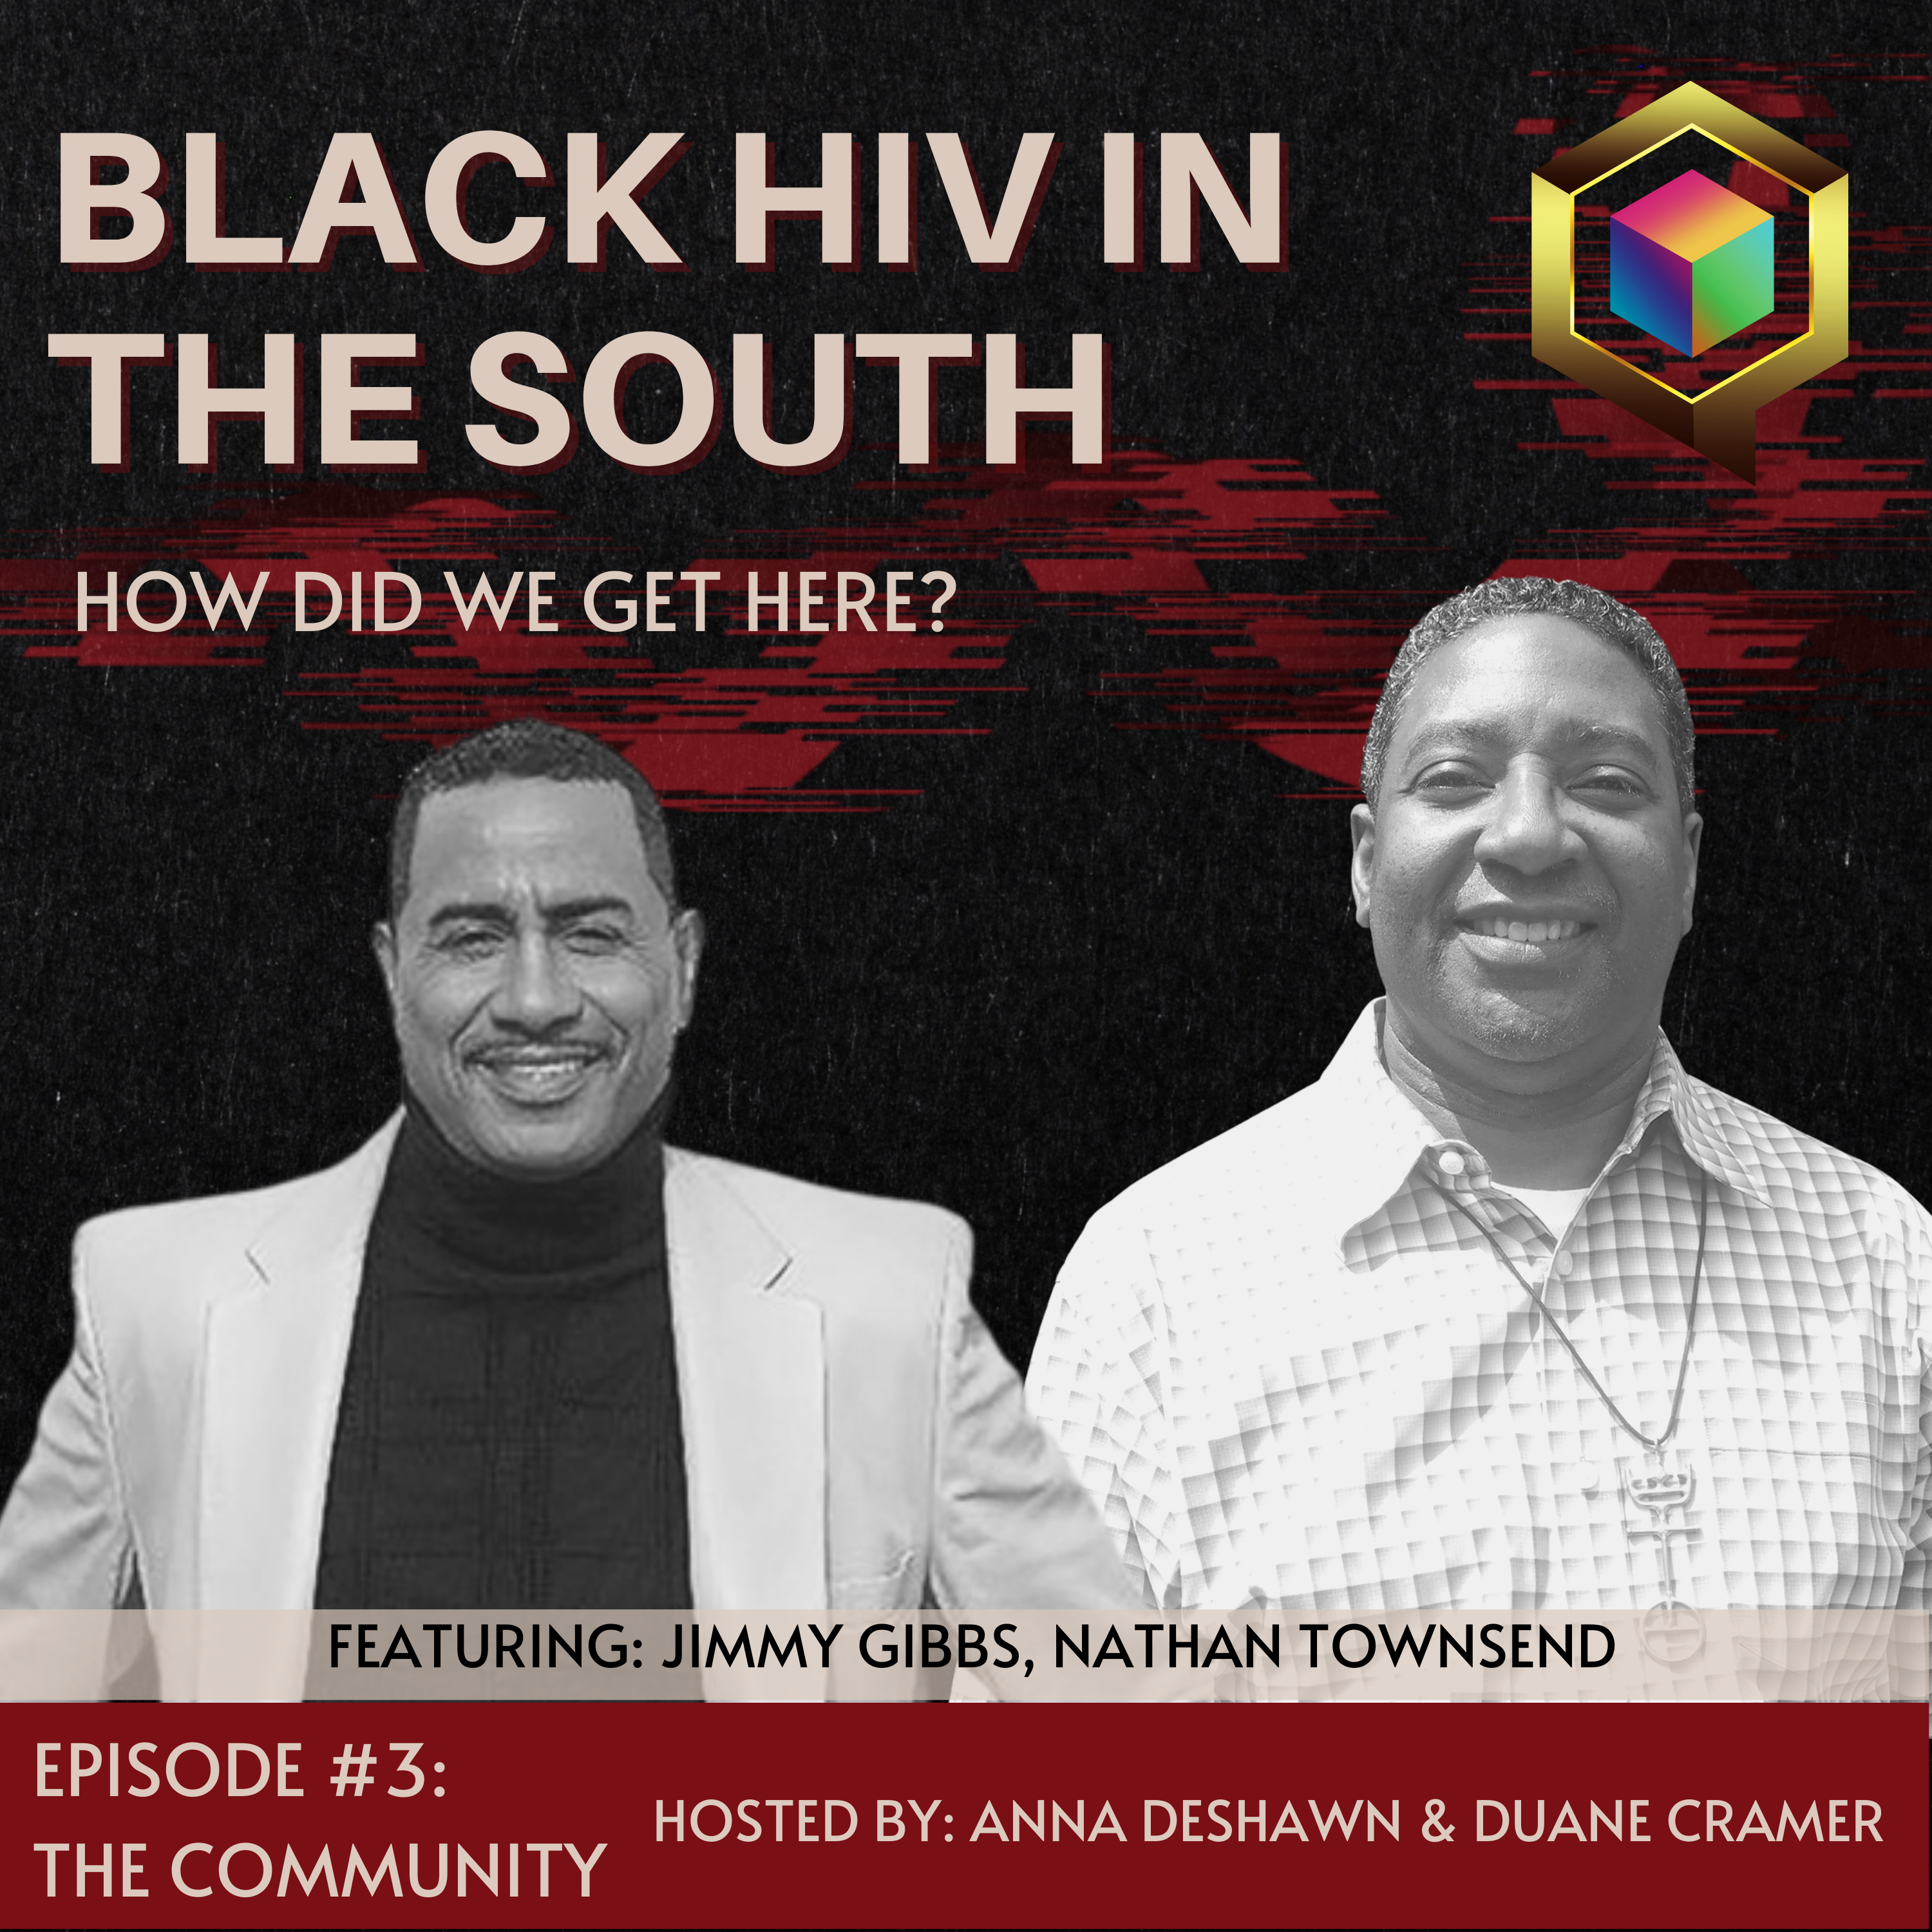 The Community of Black HIV in the South